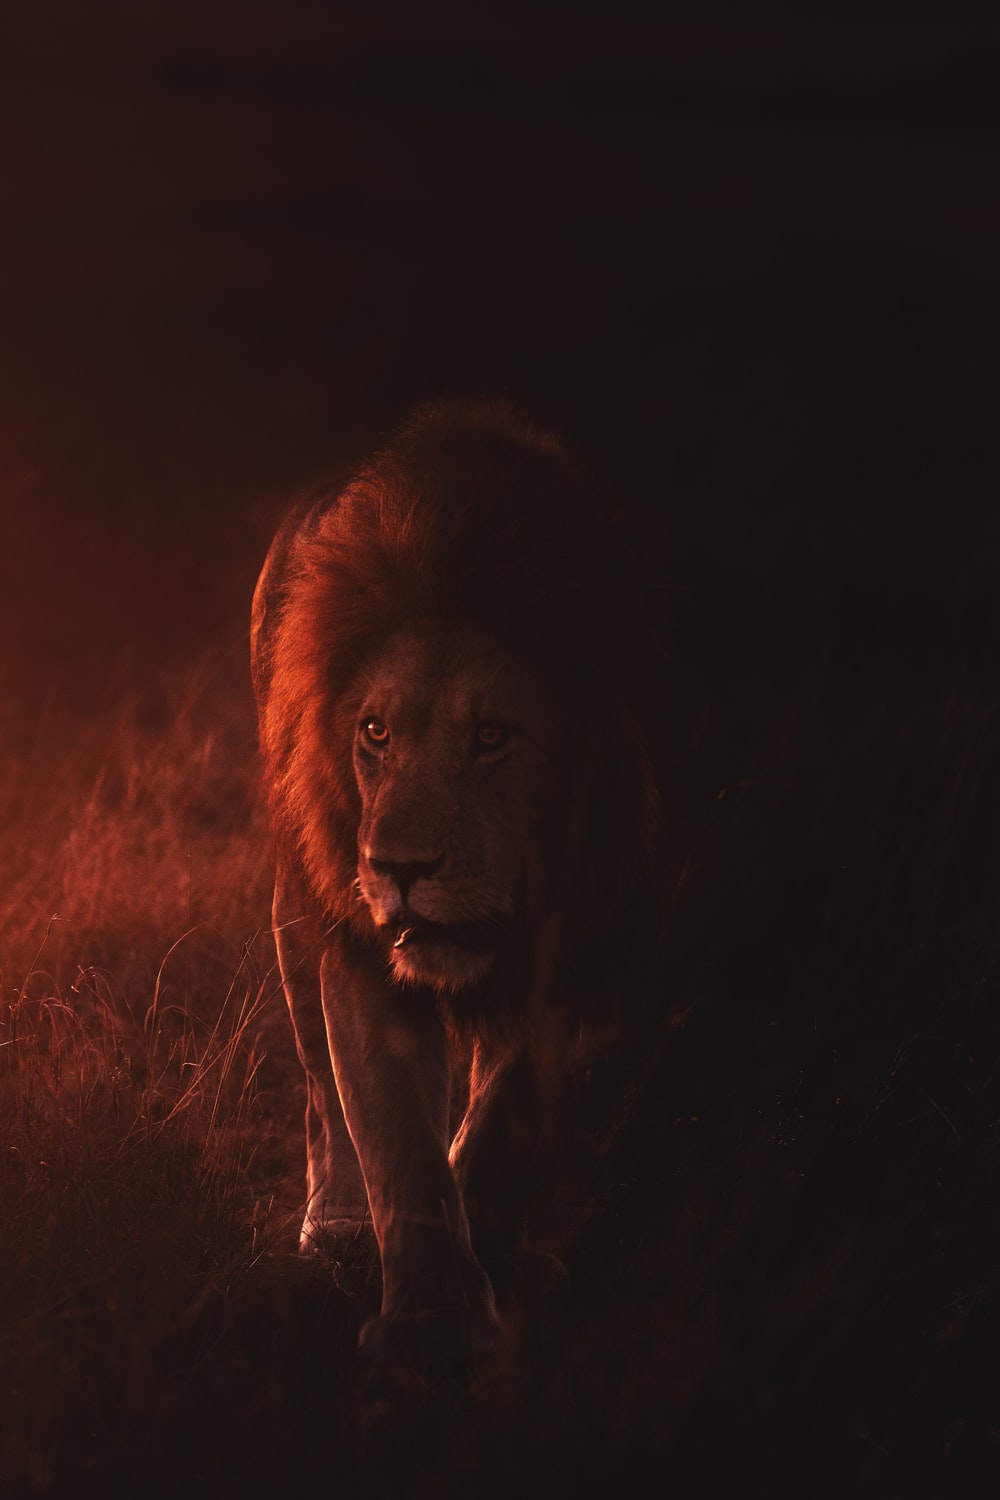 Lion Picture & Image. Download Free Image